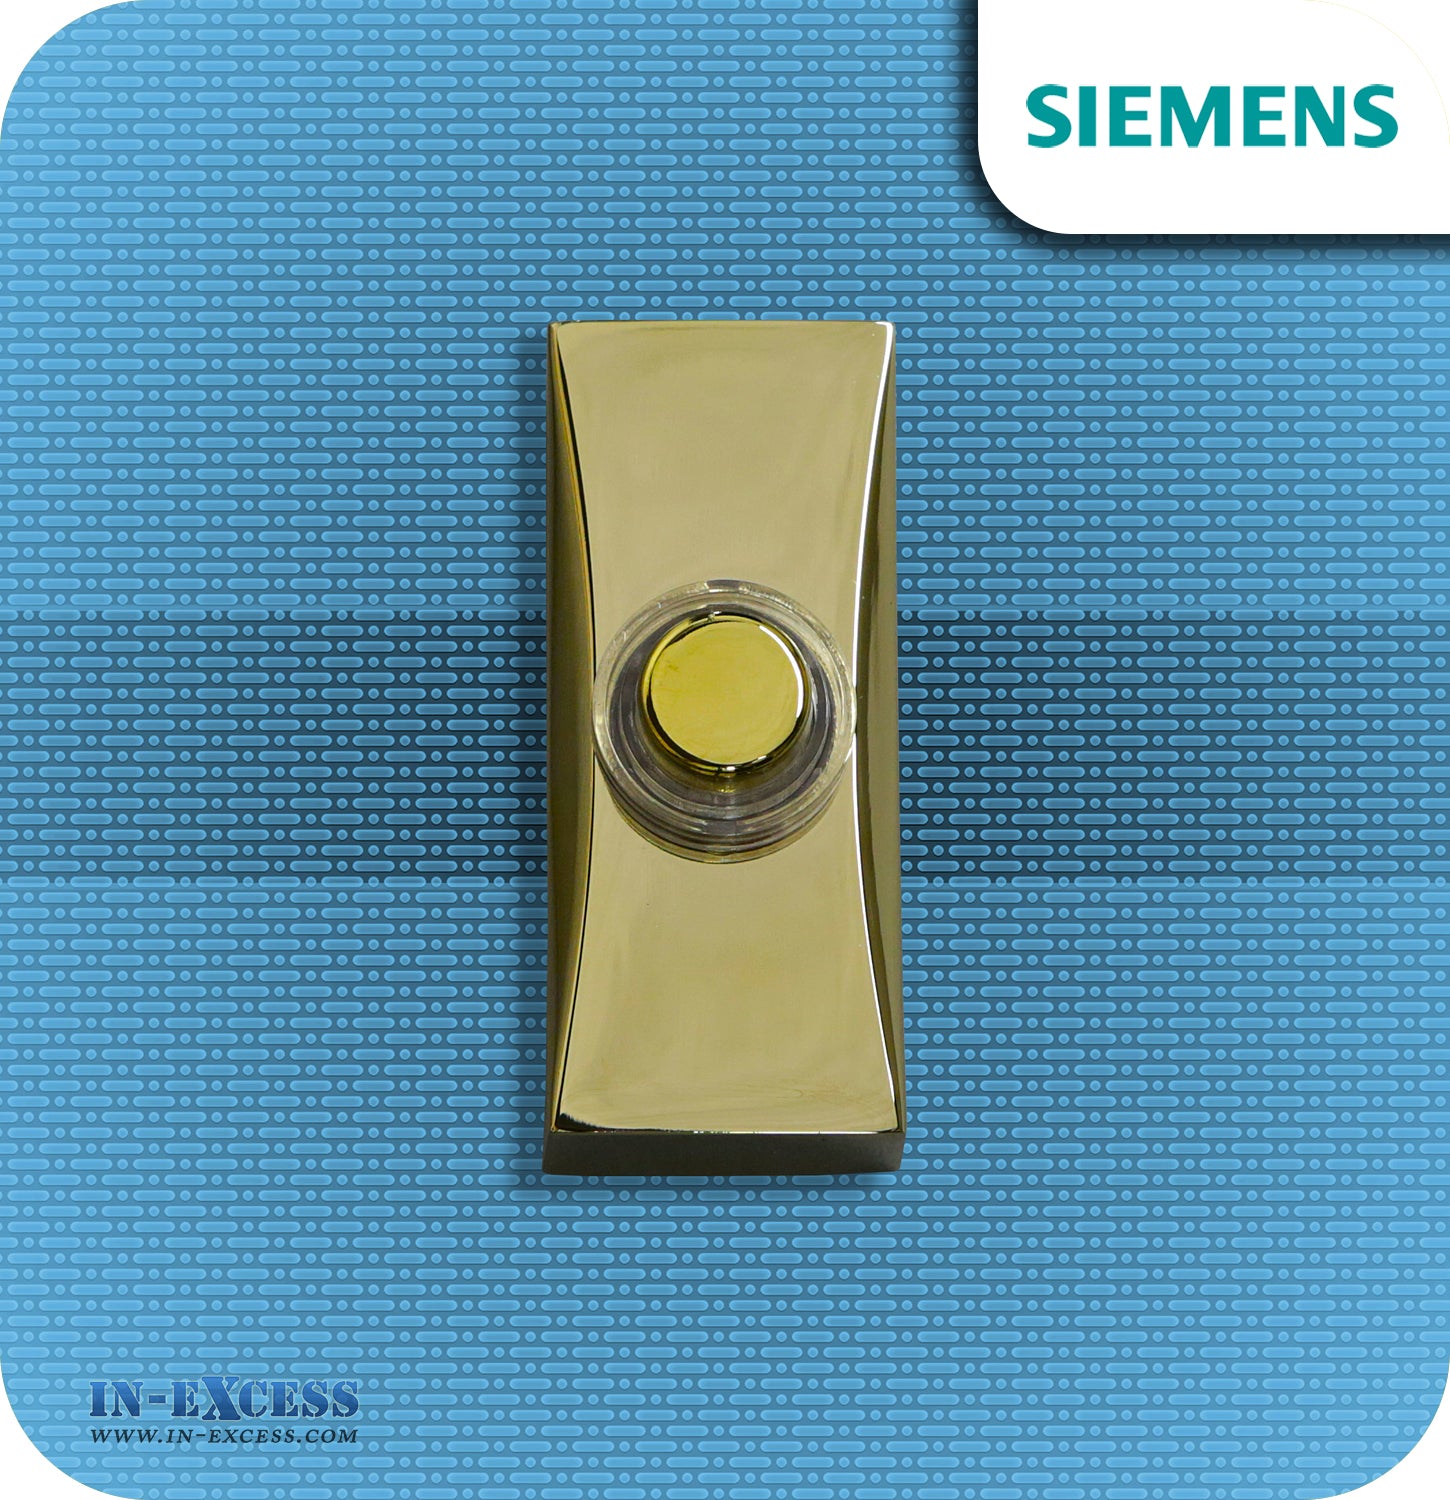 Siemens Brass Effect Wired Bell Push For Wired Door Chimes - JSJS-312 (DCW15)